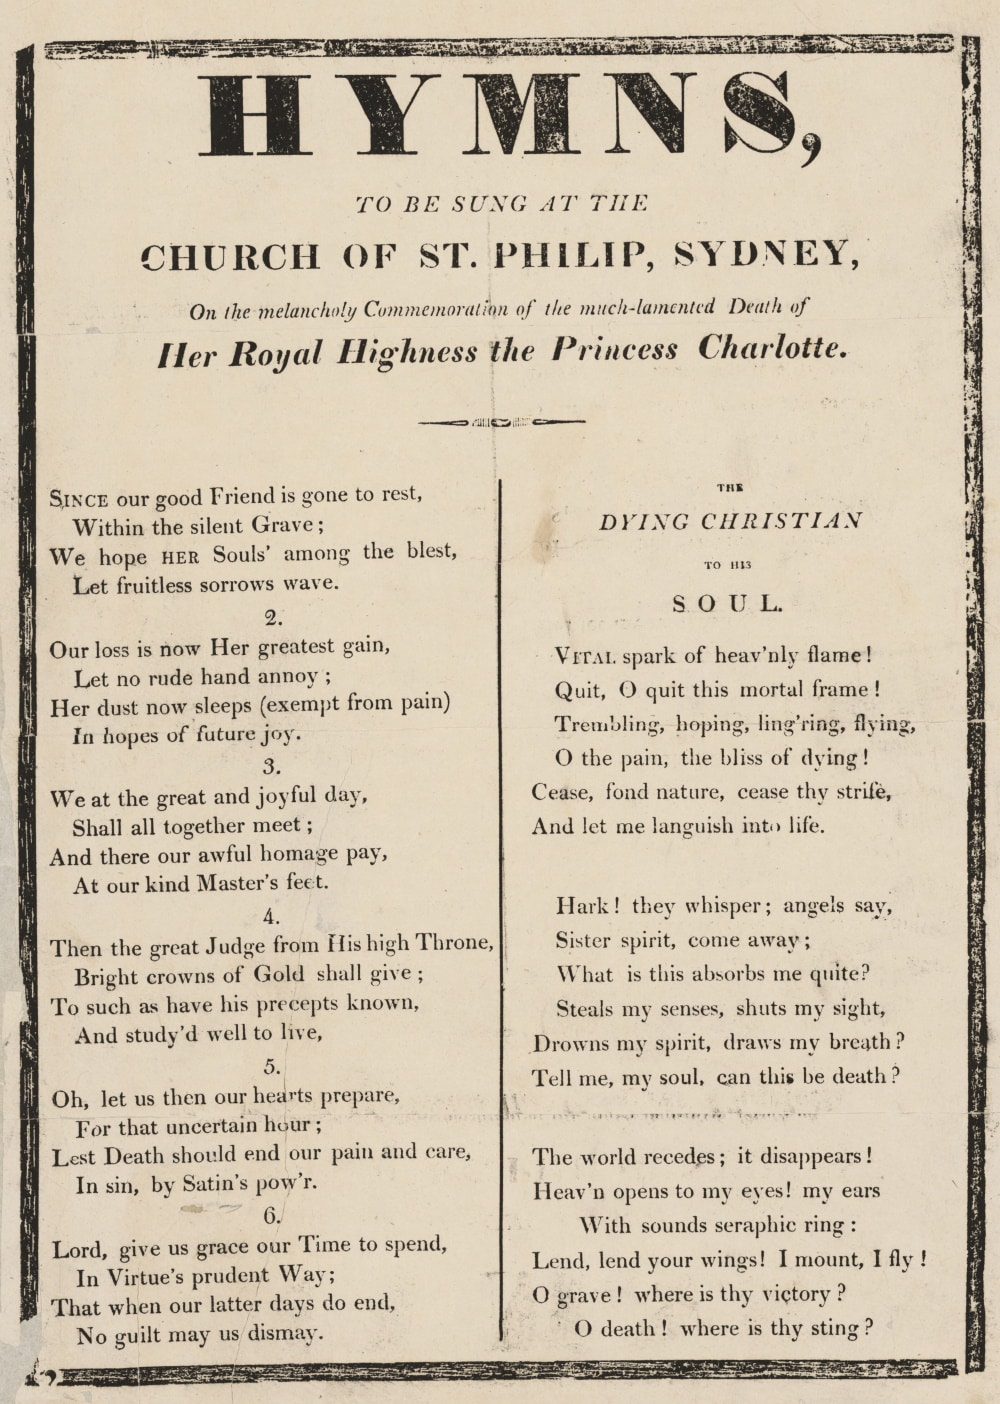 Hymns to be sung at the Church of St. Philip, Sydney . . . on the death of princess Charlotte, 5 April 1818